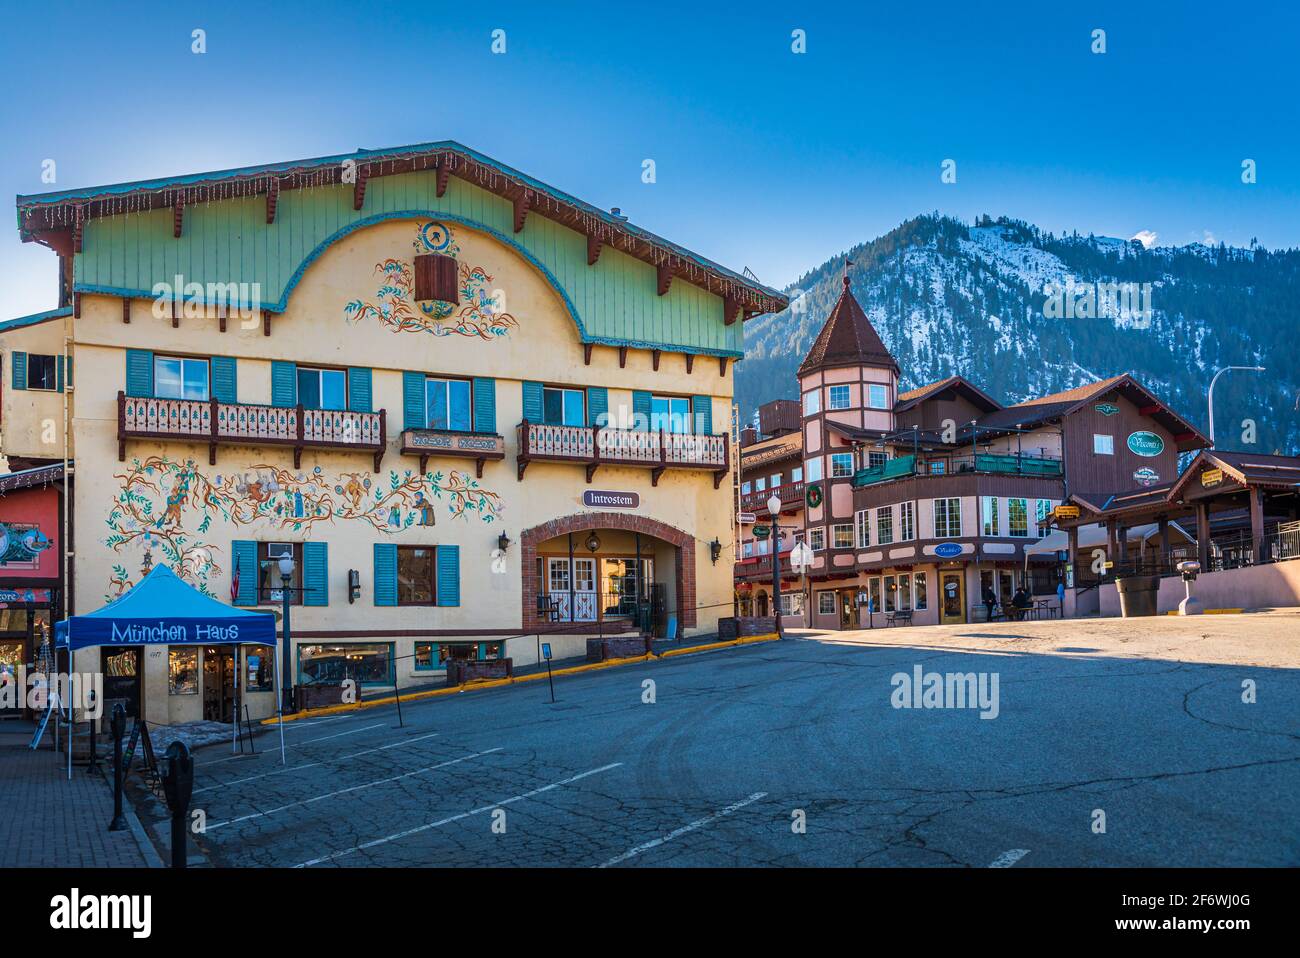 Leavenworth is a city in Chelan County, Washington, in Eastern Washington United States. The entire town center is modelled on a Bavarian village. Stock Photo